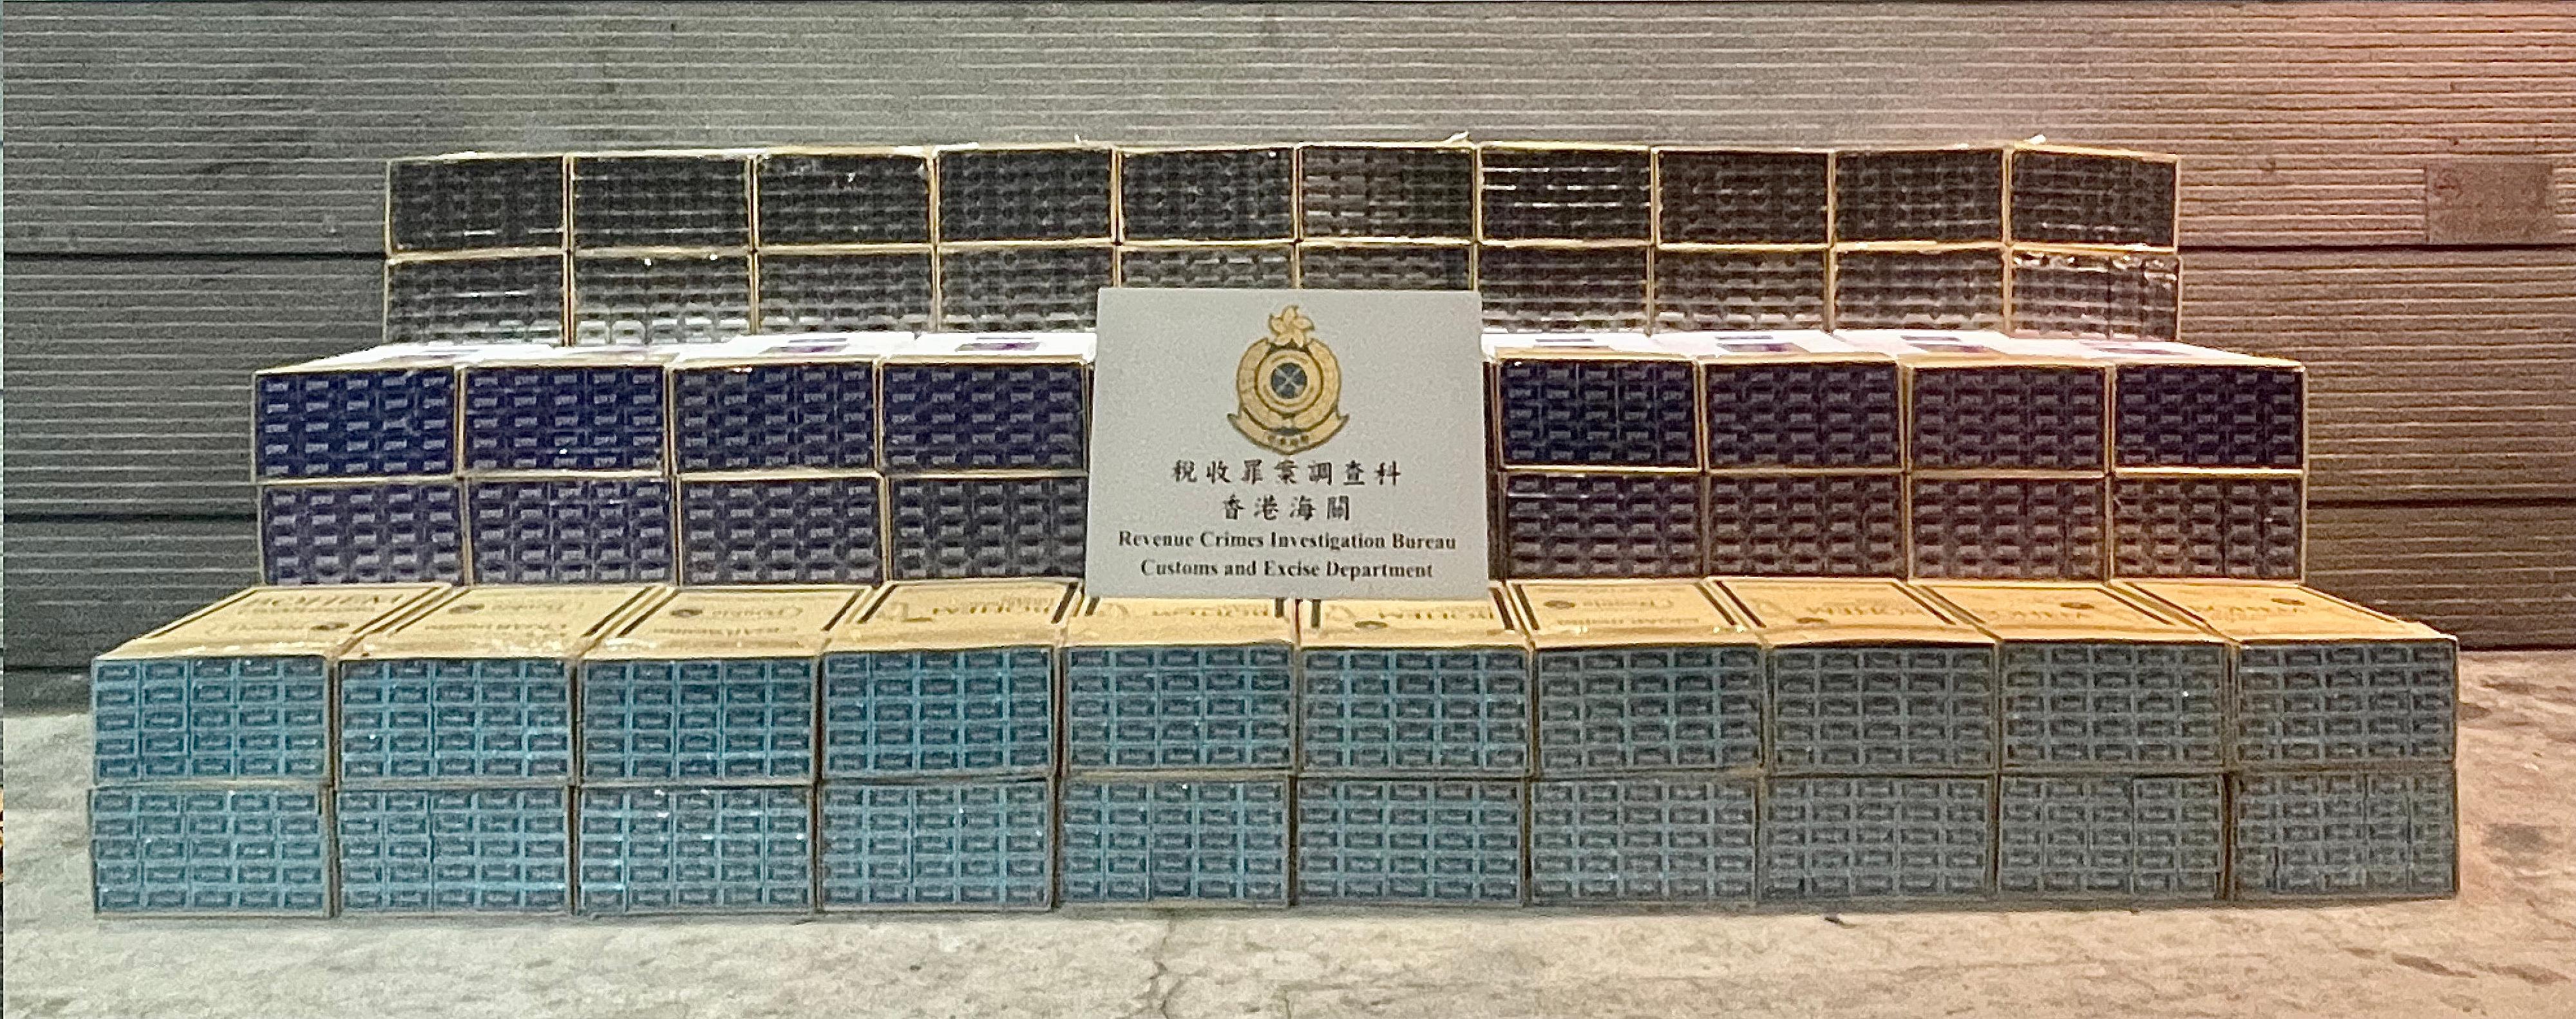 Hong Kong Customs seized about 2.9 million suspected illicit cigarettes with an estimated market value of about $11 million and a duty potential of about $7.3 million at the Lok Ma Chau Control Point yesterday (June 18). Photo shows the suspected illicit cigarettes seized.